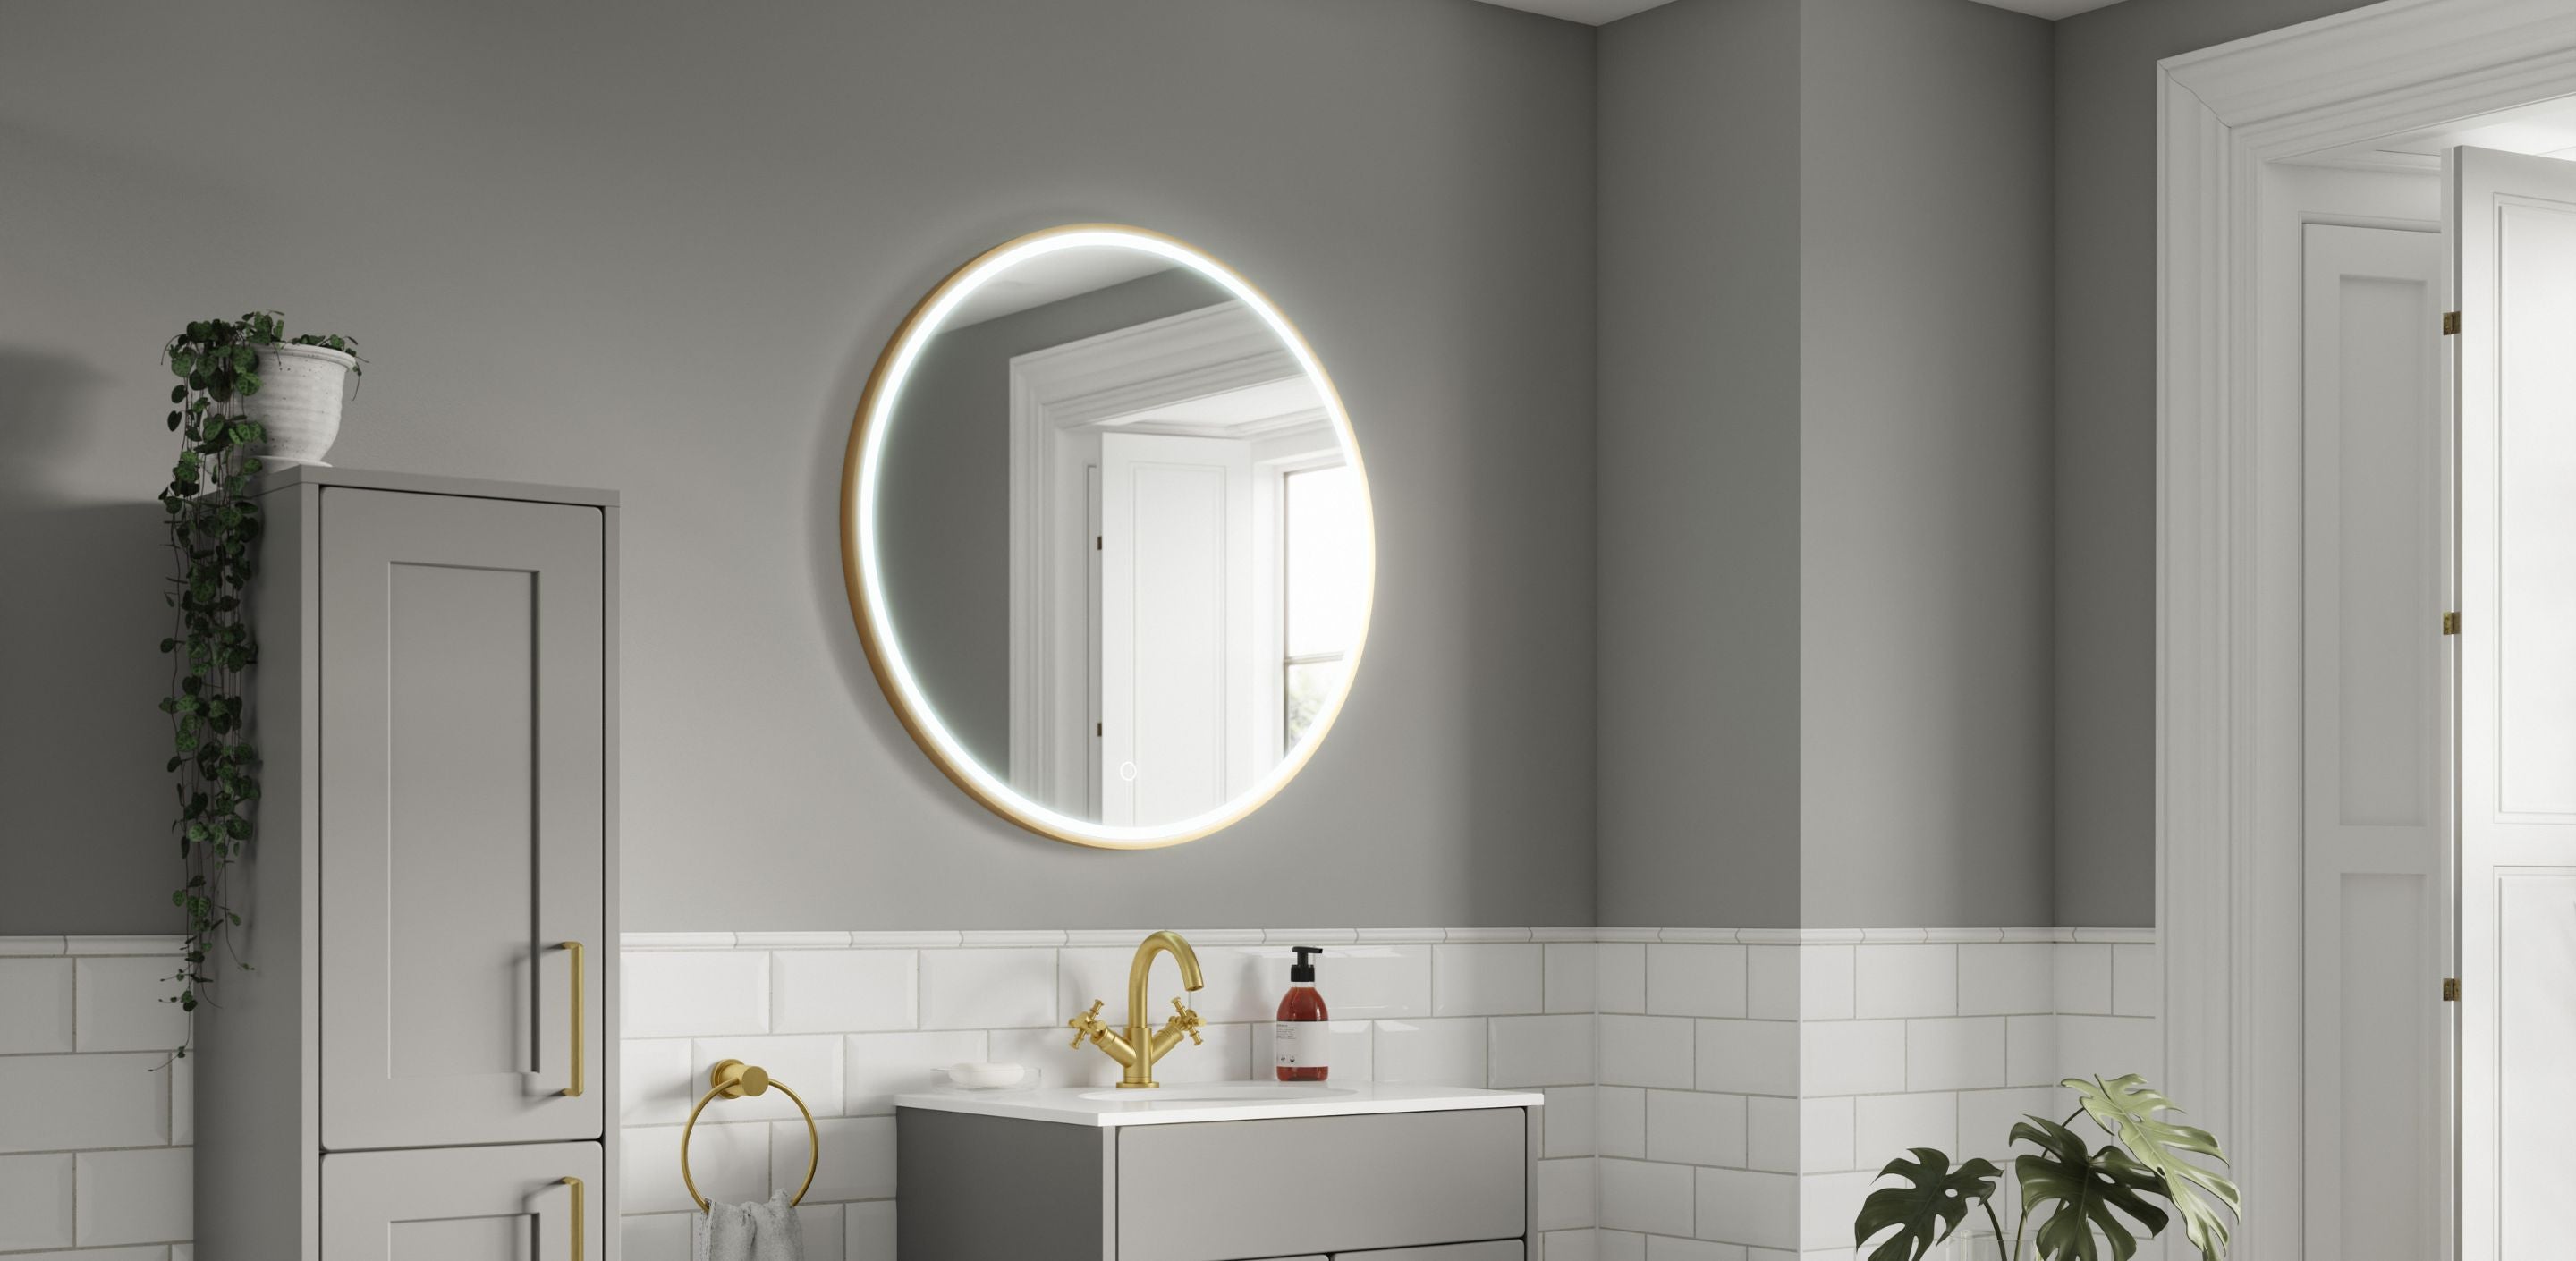 How to choose the right mirror shape for your bathroom